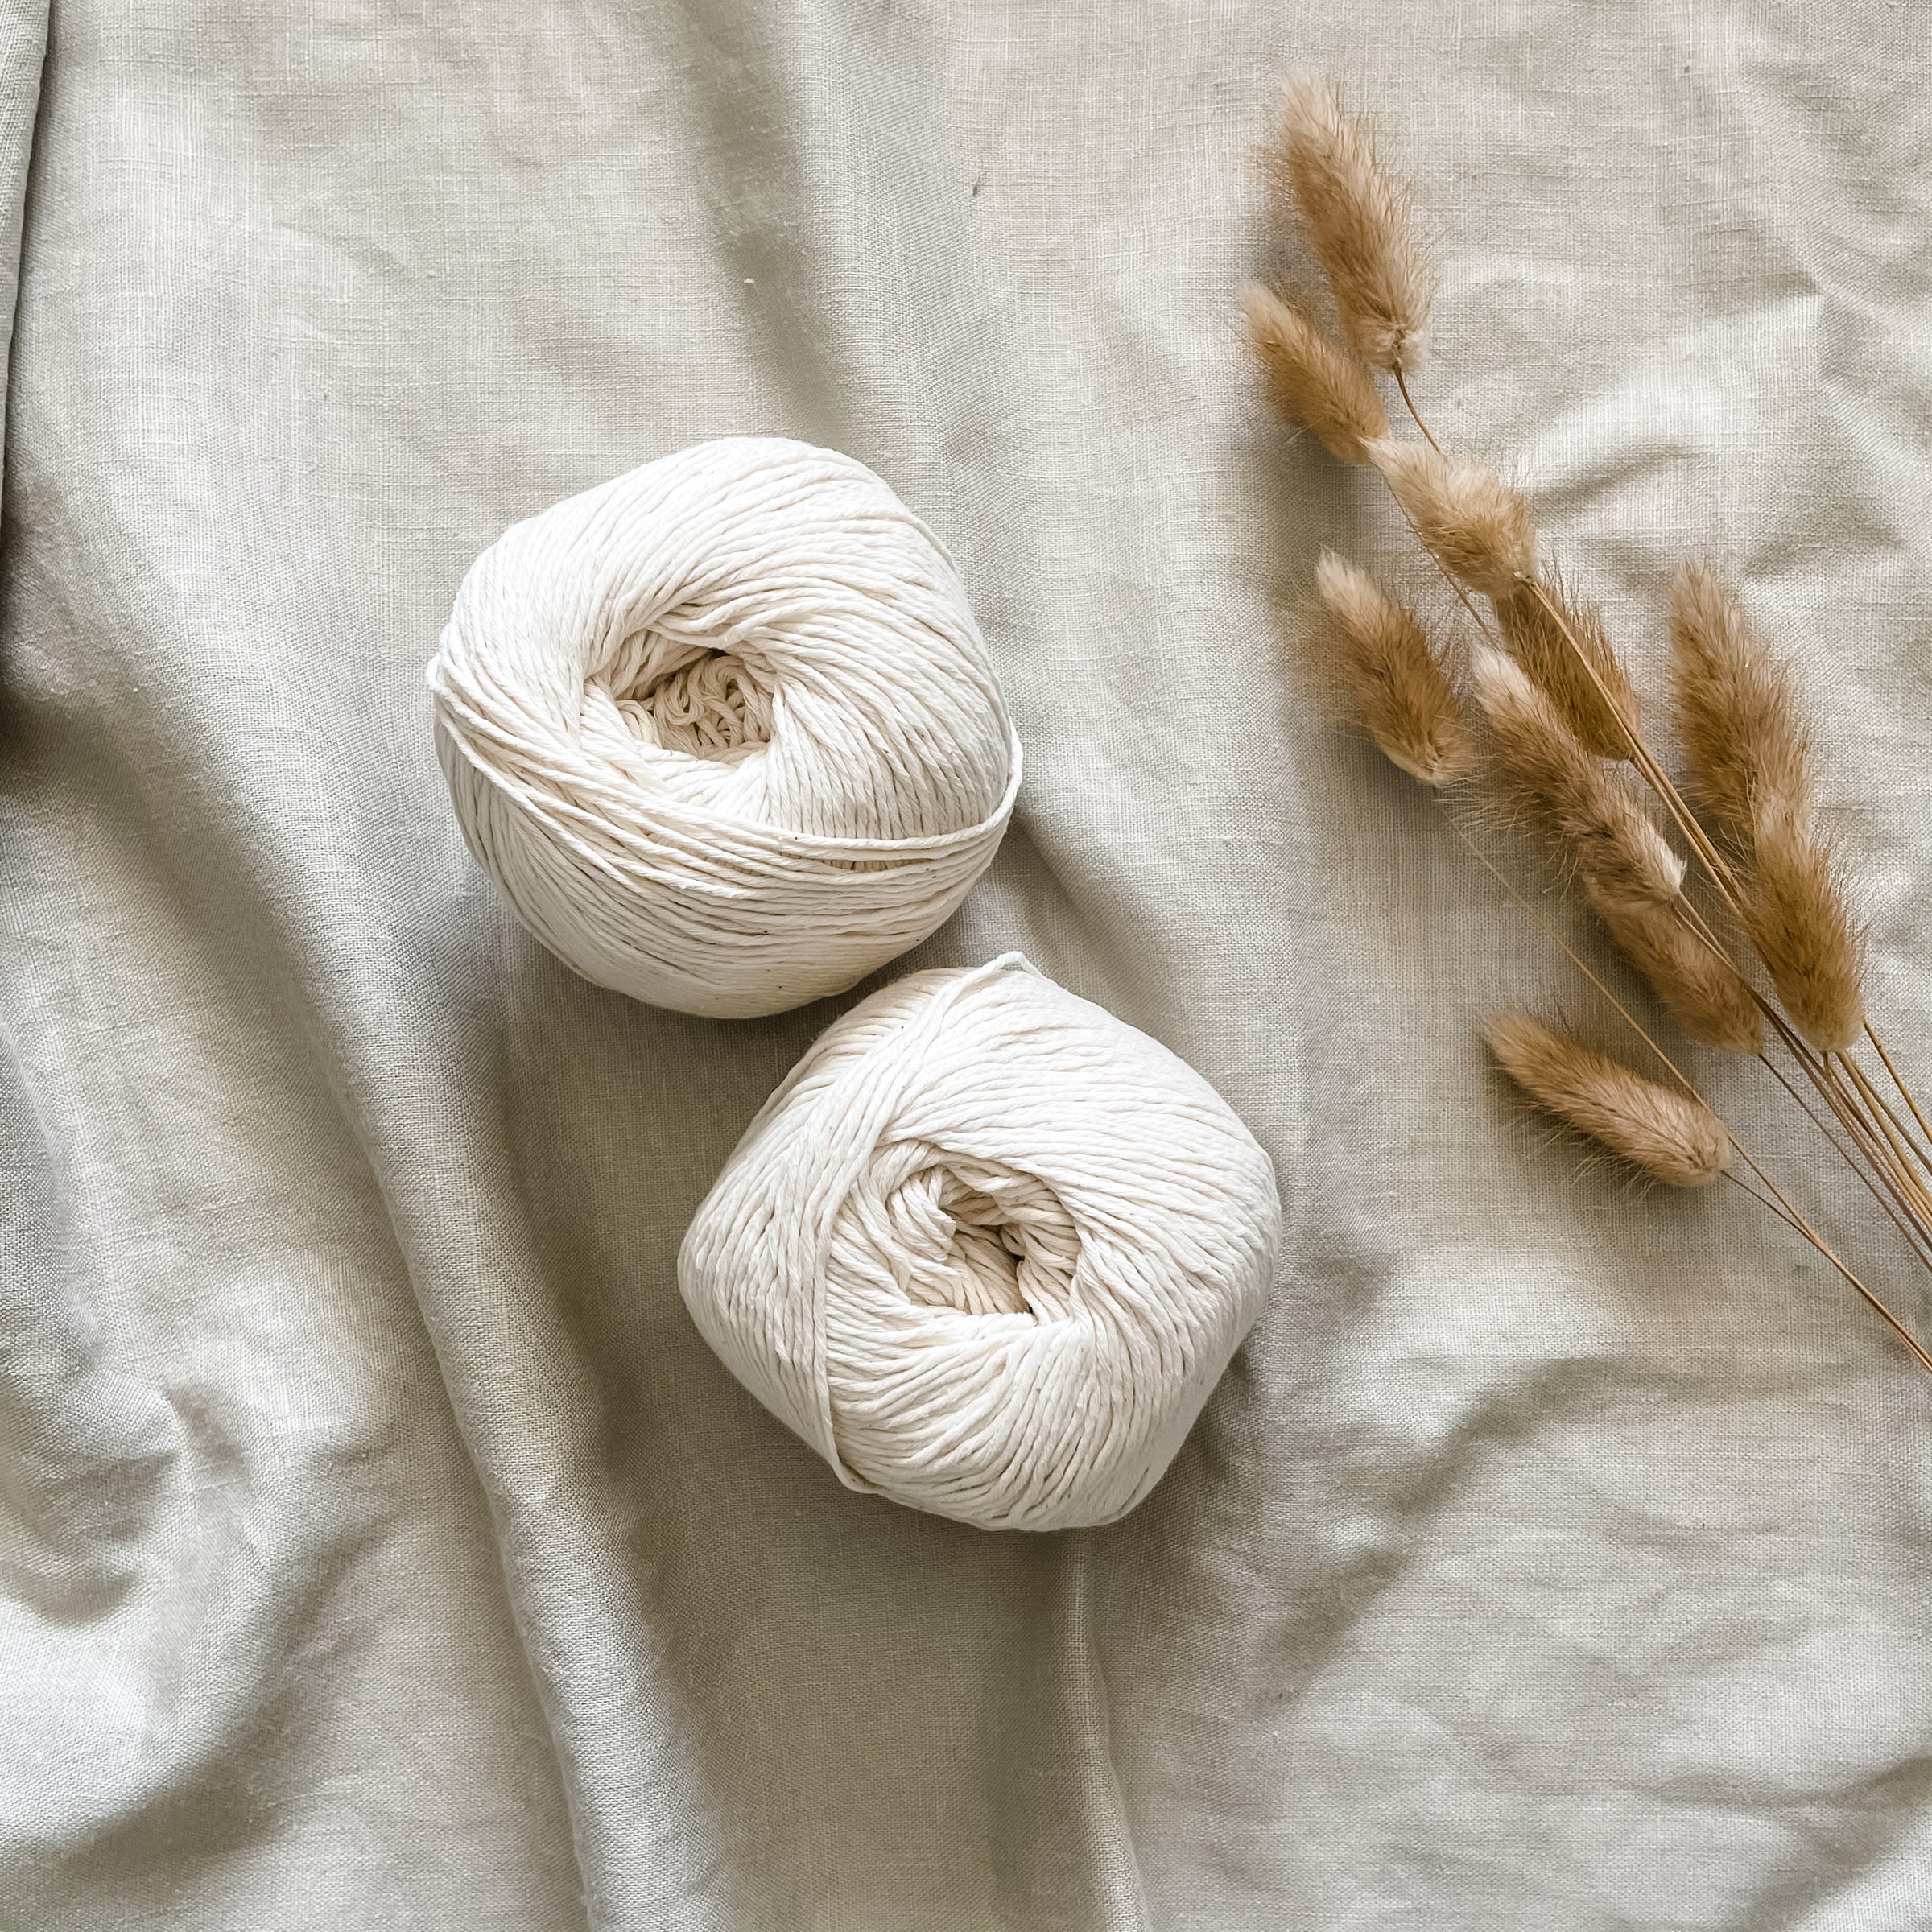 Our Little Cotton will bring your finer projects to life, such as amigurumi, face scribbles or even mini macrame projects. This cotton lend is made from 100% recycled fibres. Also perfect for weaving warp.